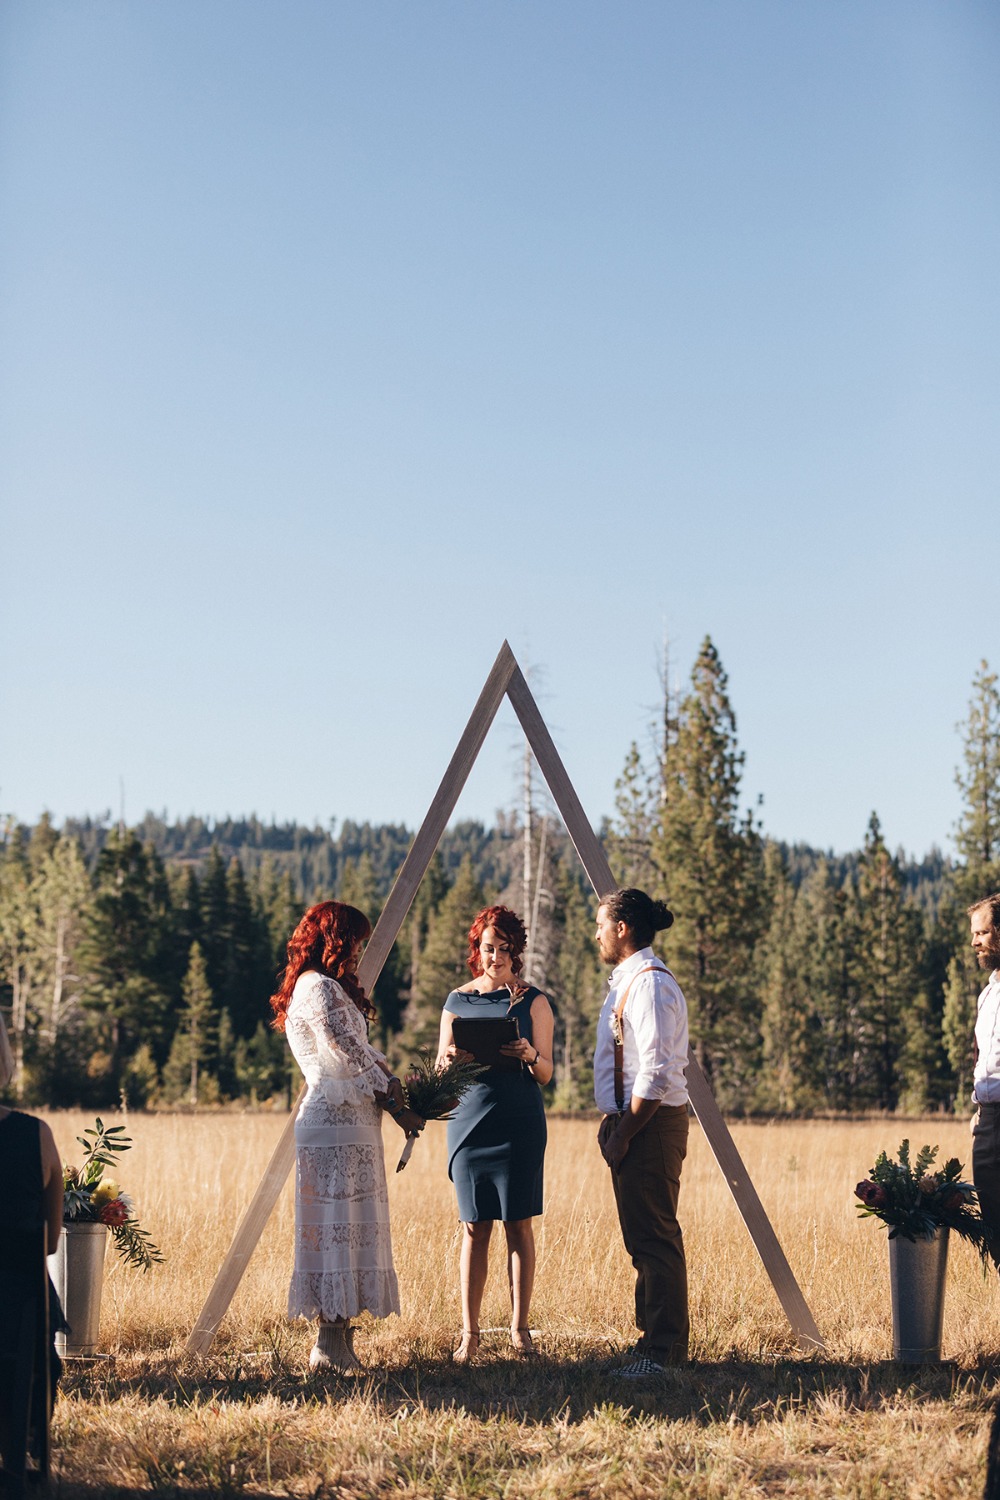 A Beautifully Informal Rustic New Age Wedding